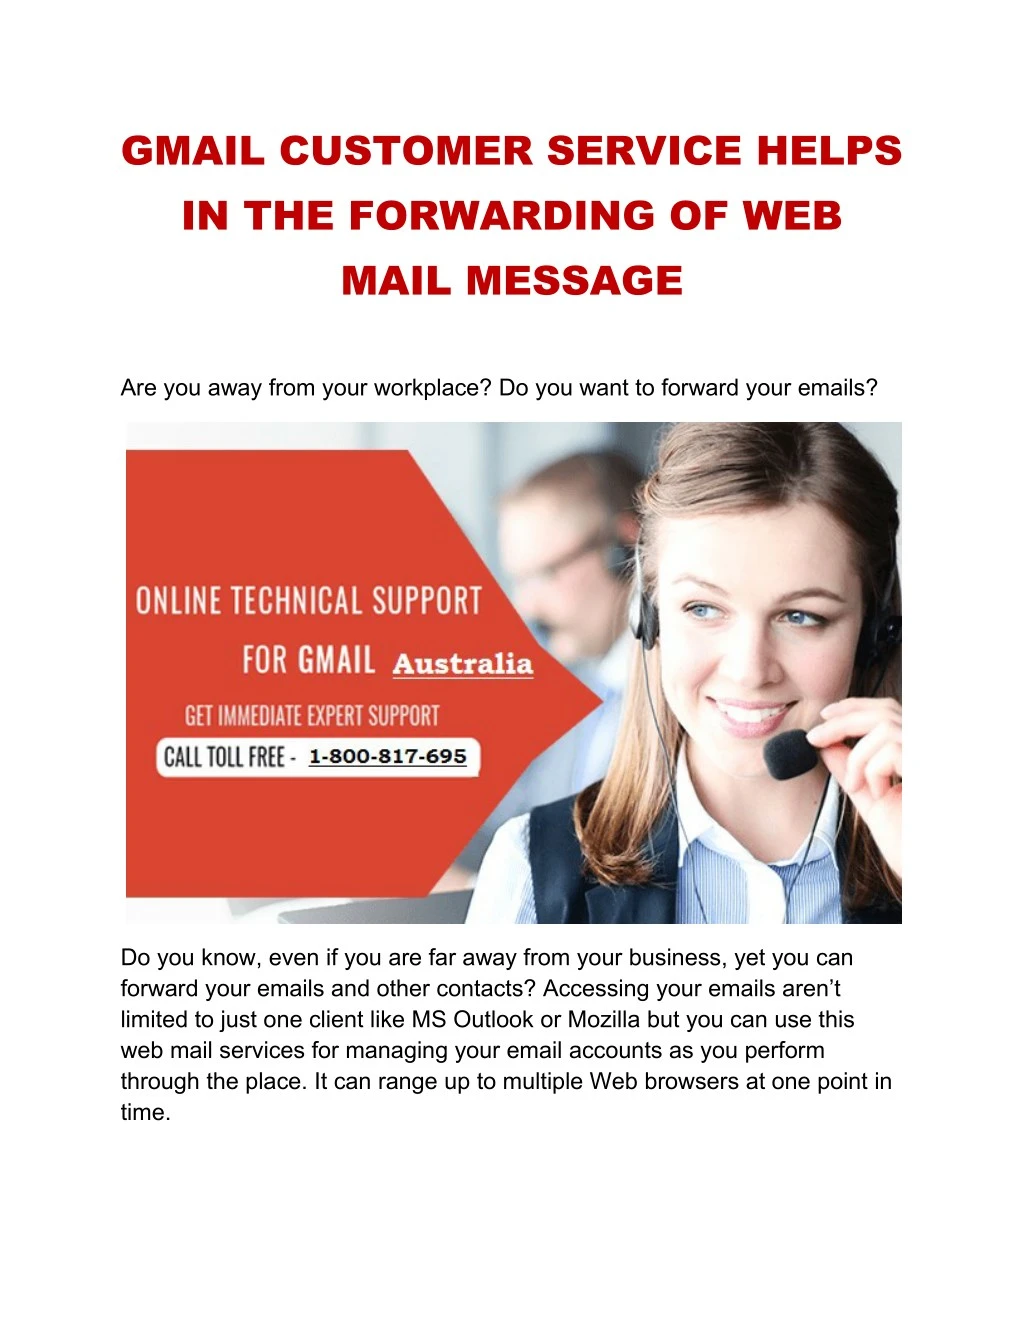 gmail customer service helps in the forwarding